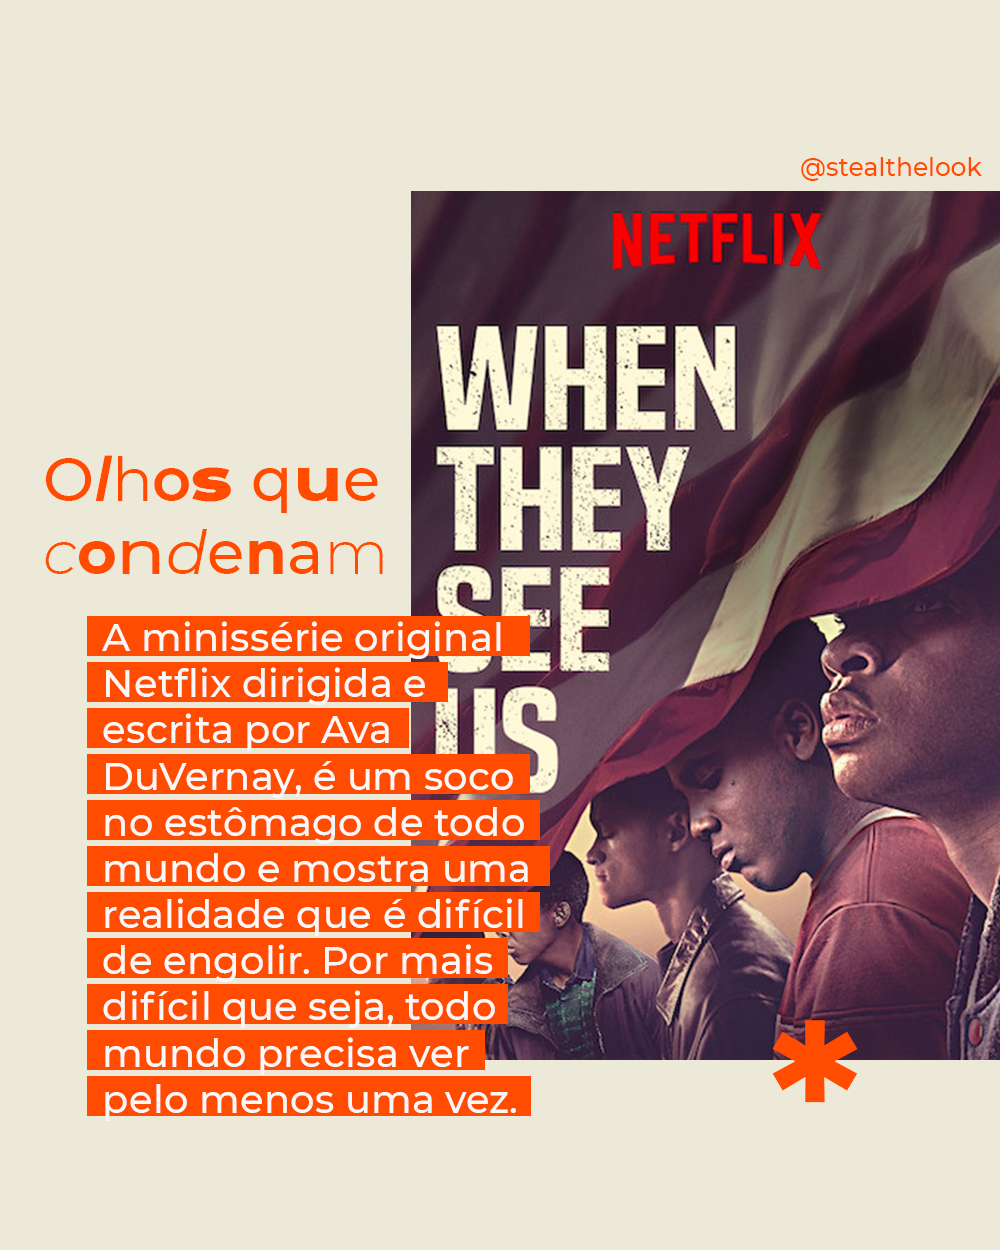 It girls - Filmes e séries - Antirracismo - Outono - Street Style - https://stealthelook.com.br